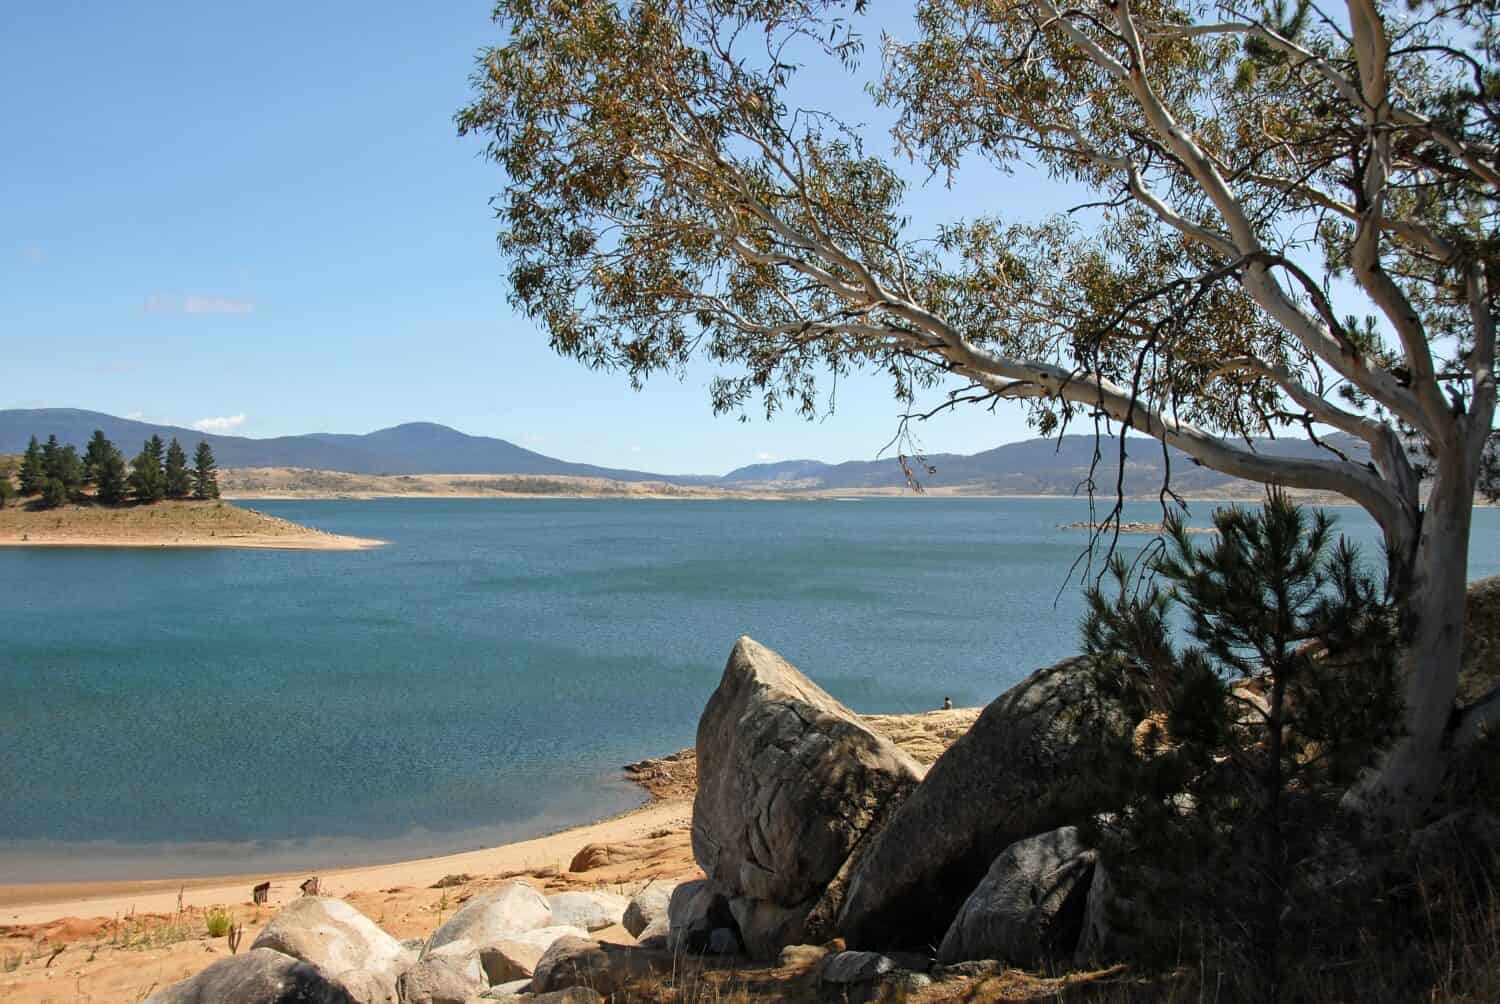 Jindabyne, New South Wales, Australia: View over Lake Jindabyne with a tree and rocks in the foreground. Jindabyne is a tourist destination near the Snowy Mountains.